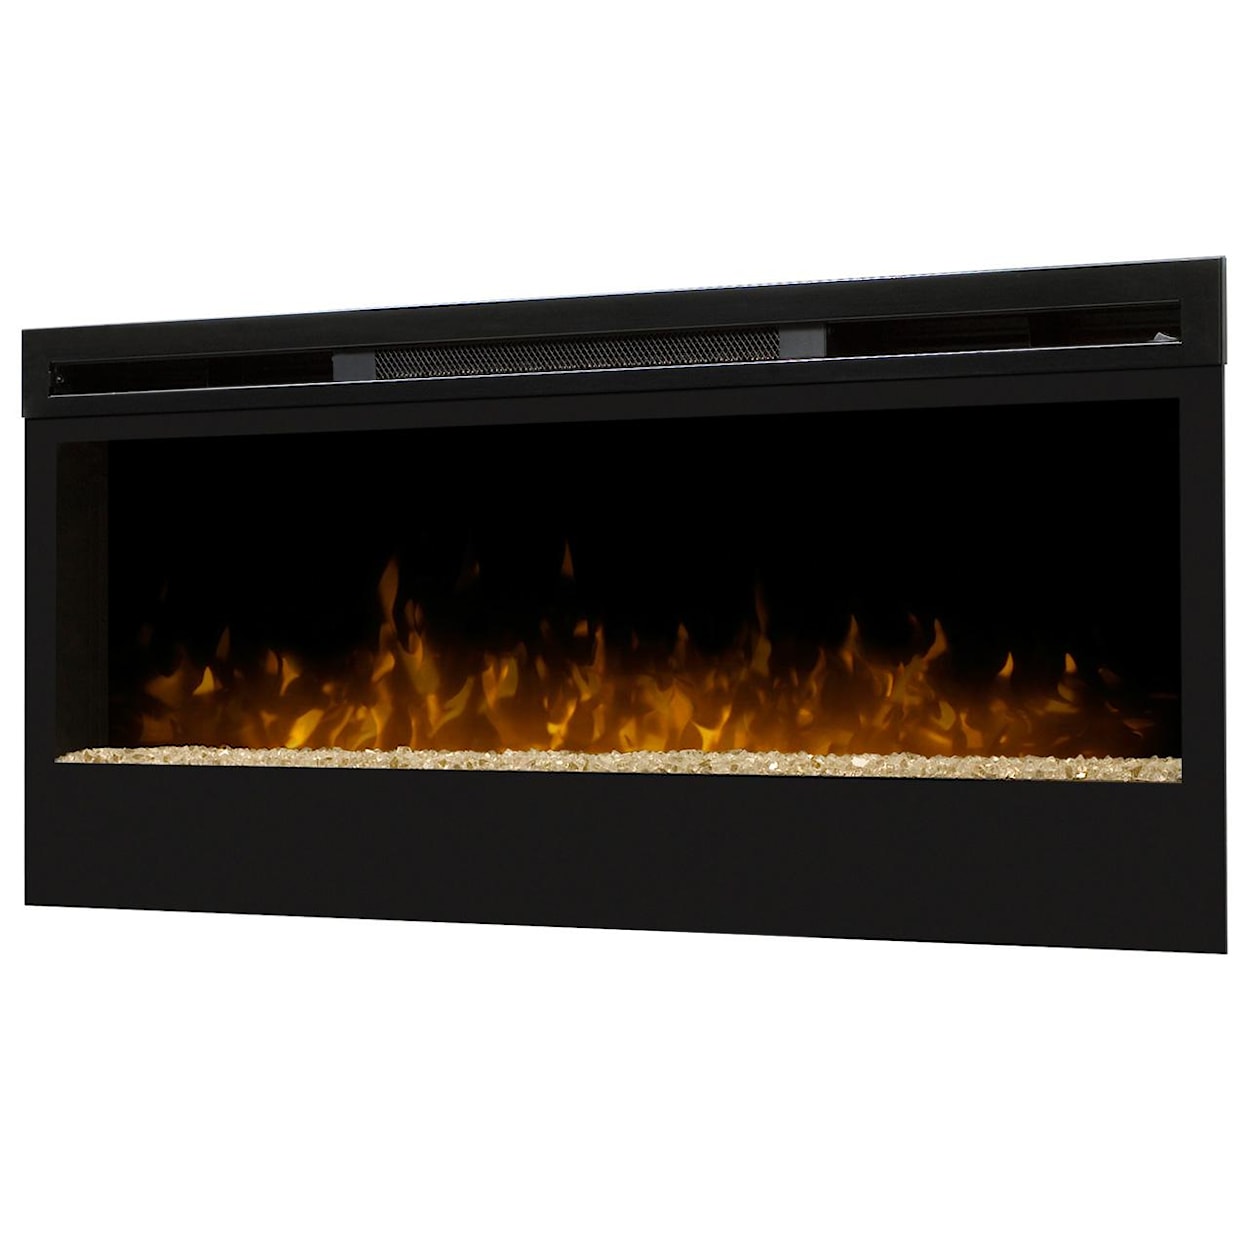 Dimplex Wall Mount Fireplaces Synergy Wall Mount Fireplace